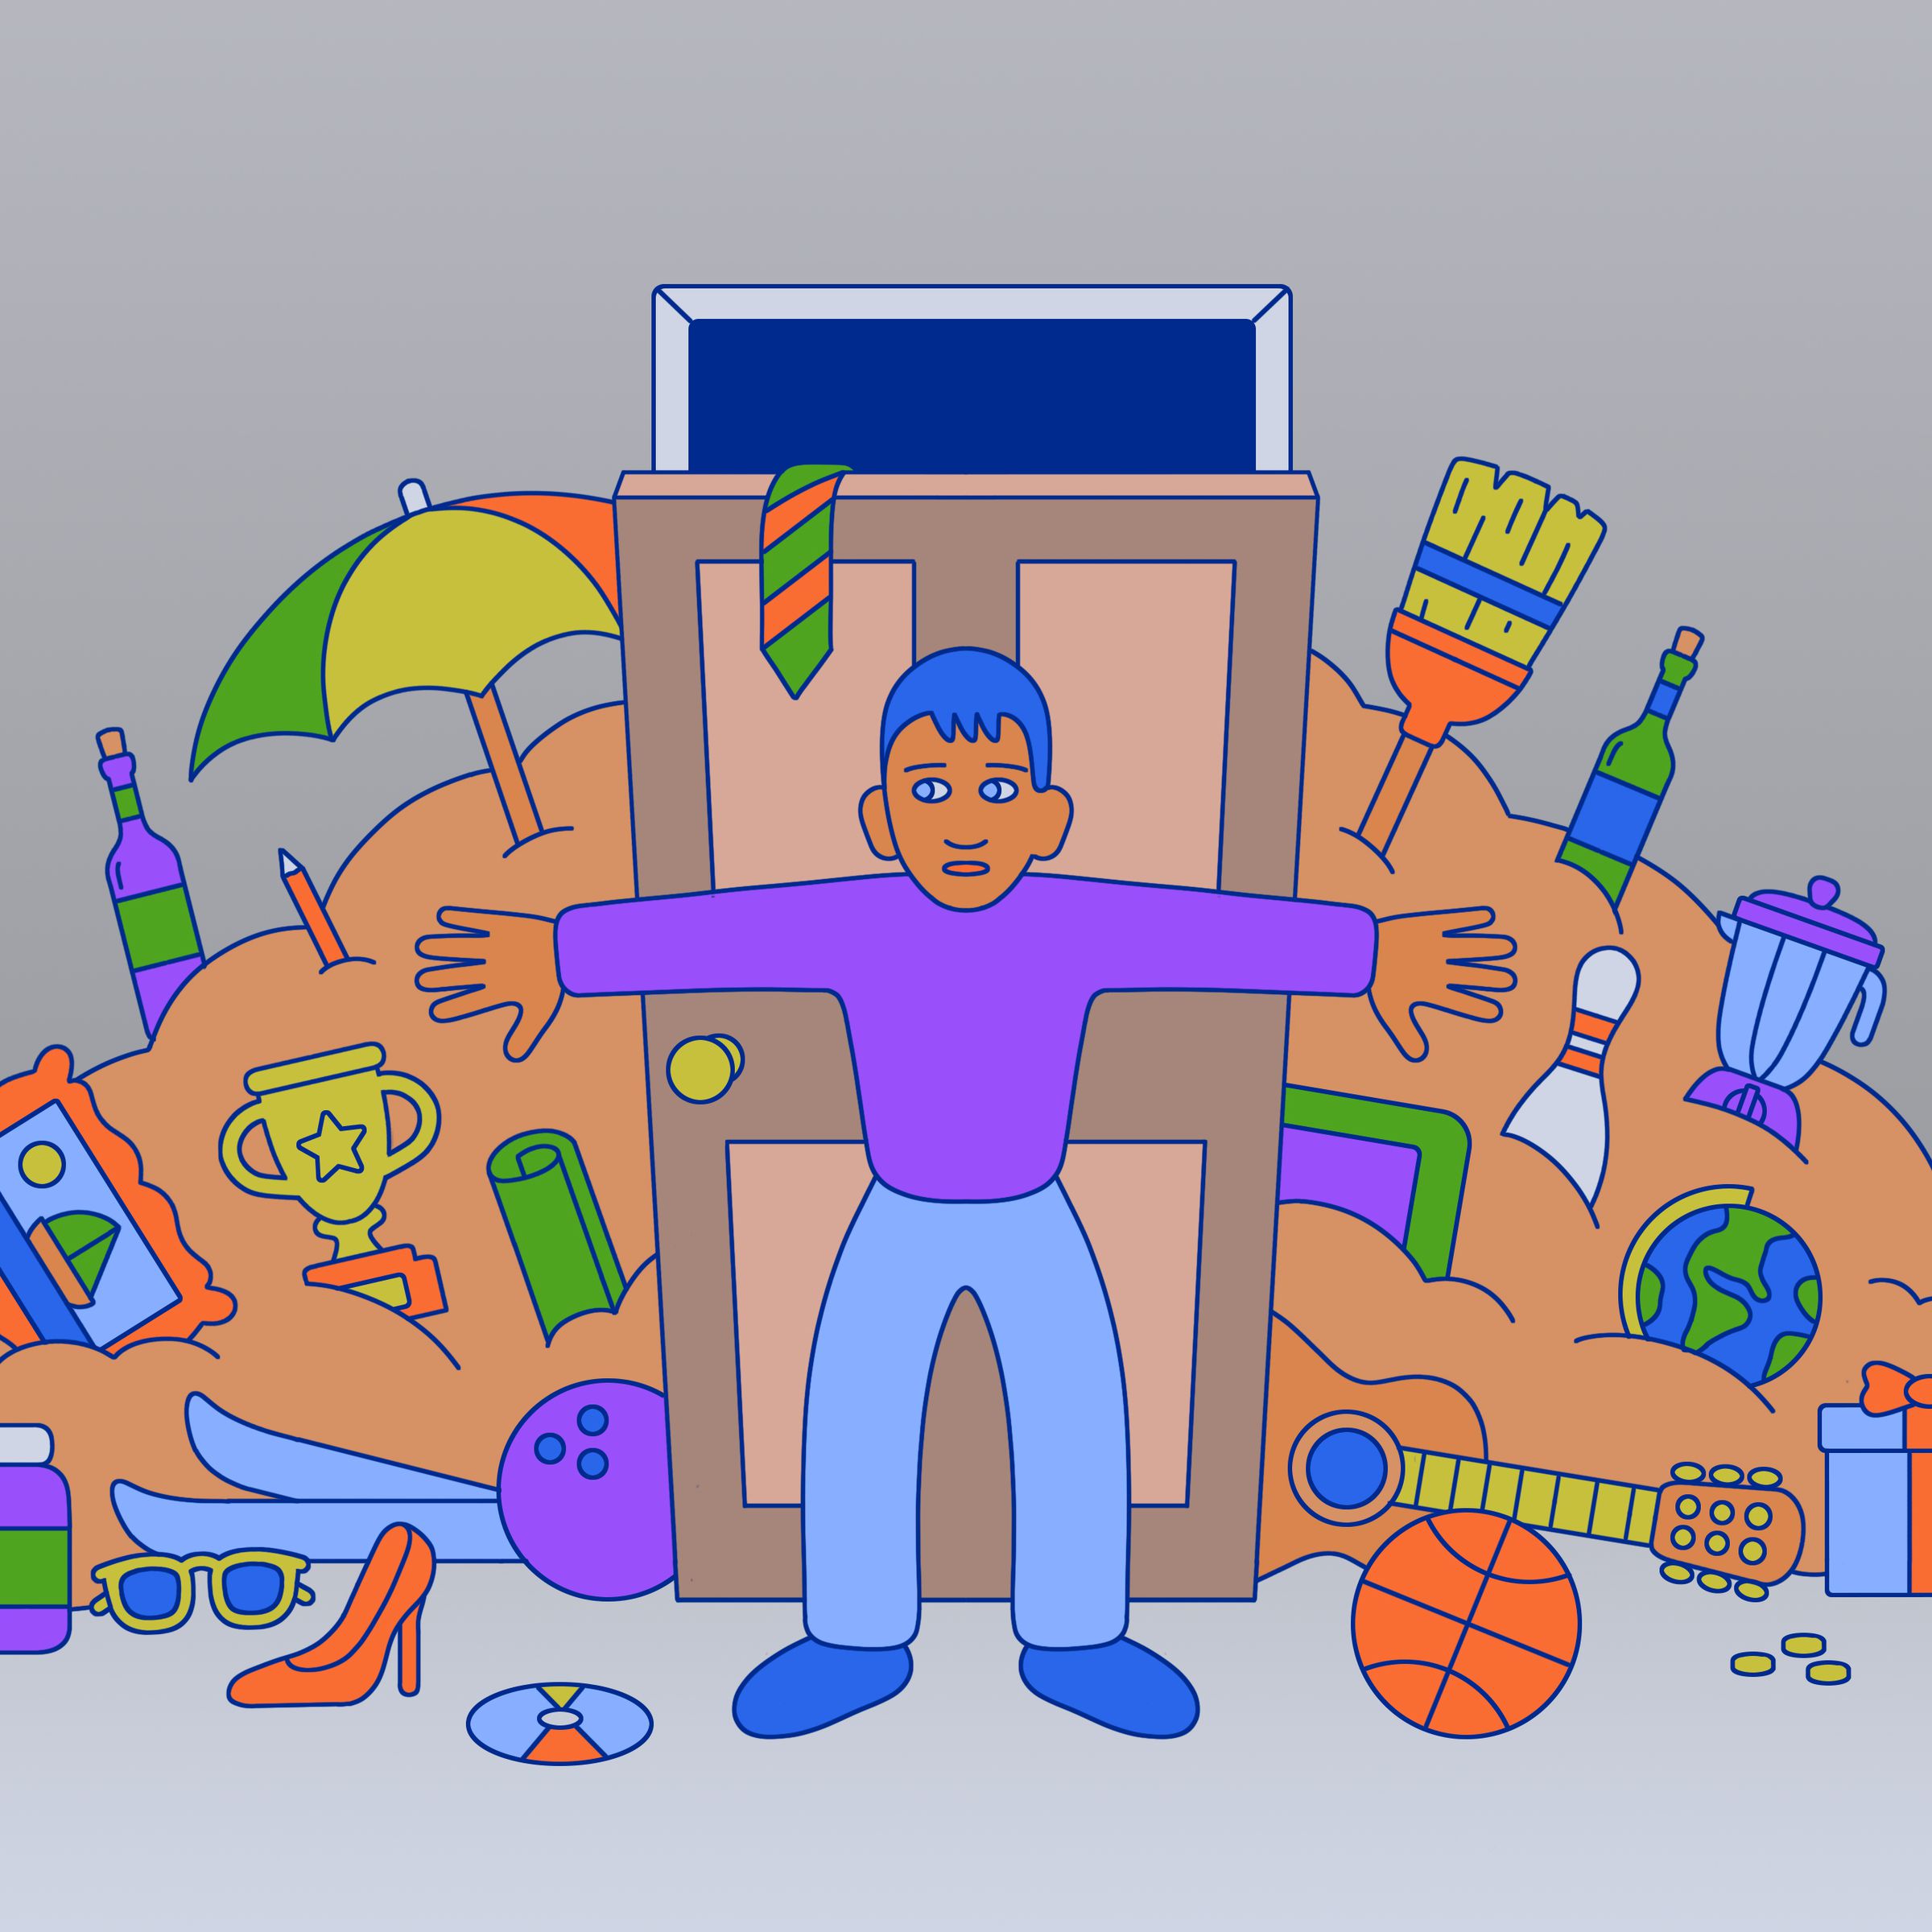 Illustration of a person holding back a mountain of stuff on the other side of a door.